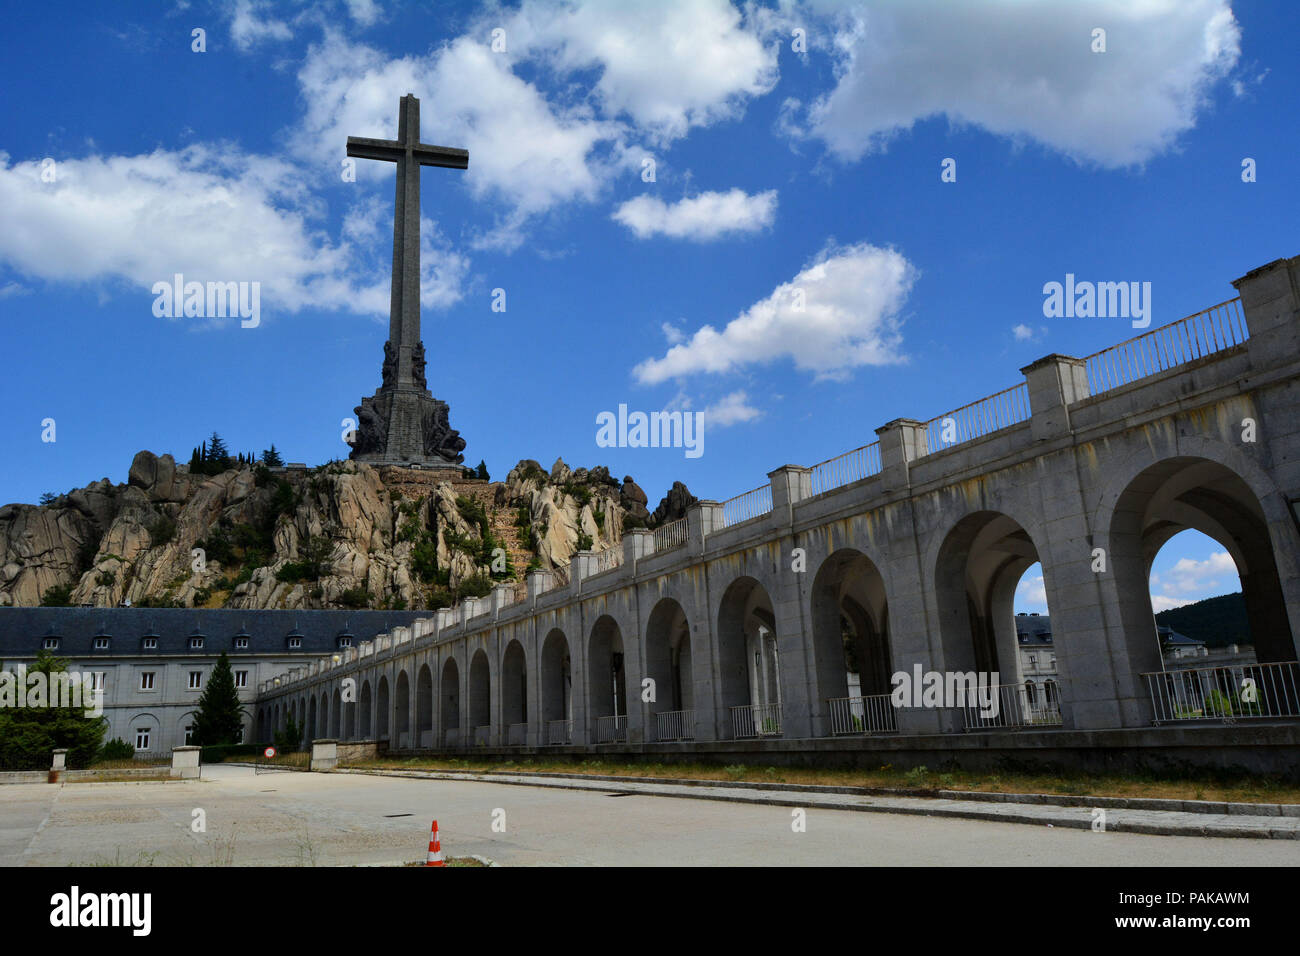 The 'Valley of the Fallen' is a Spanish monumental complex built between 1940 and 1958 in the village of El Escorial, in the Community of Madrid. The cross is 150 meters high. Francisco Franco (1892-1975) Head of the Spanish Government between 1938 and 1973 ordered the construction of this monument, where his remains rest with 33,872 combatants of the civil war, belonging to both sides. It is the largest common grave in Spain. It is the only place in the European Union where a dictator is kept cult and memory. Franco was allied with Adolf Hitler in World War II. The current government anno Stock Photo